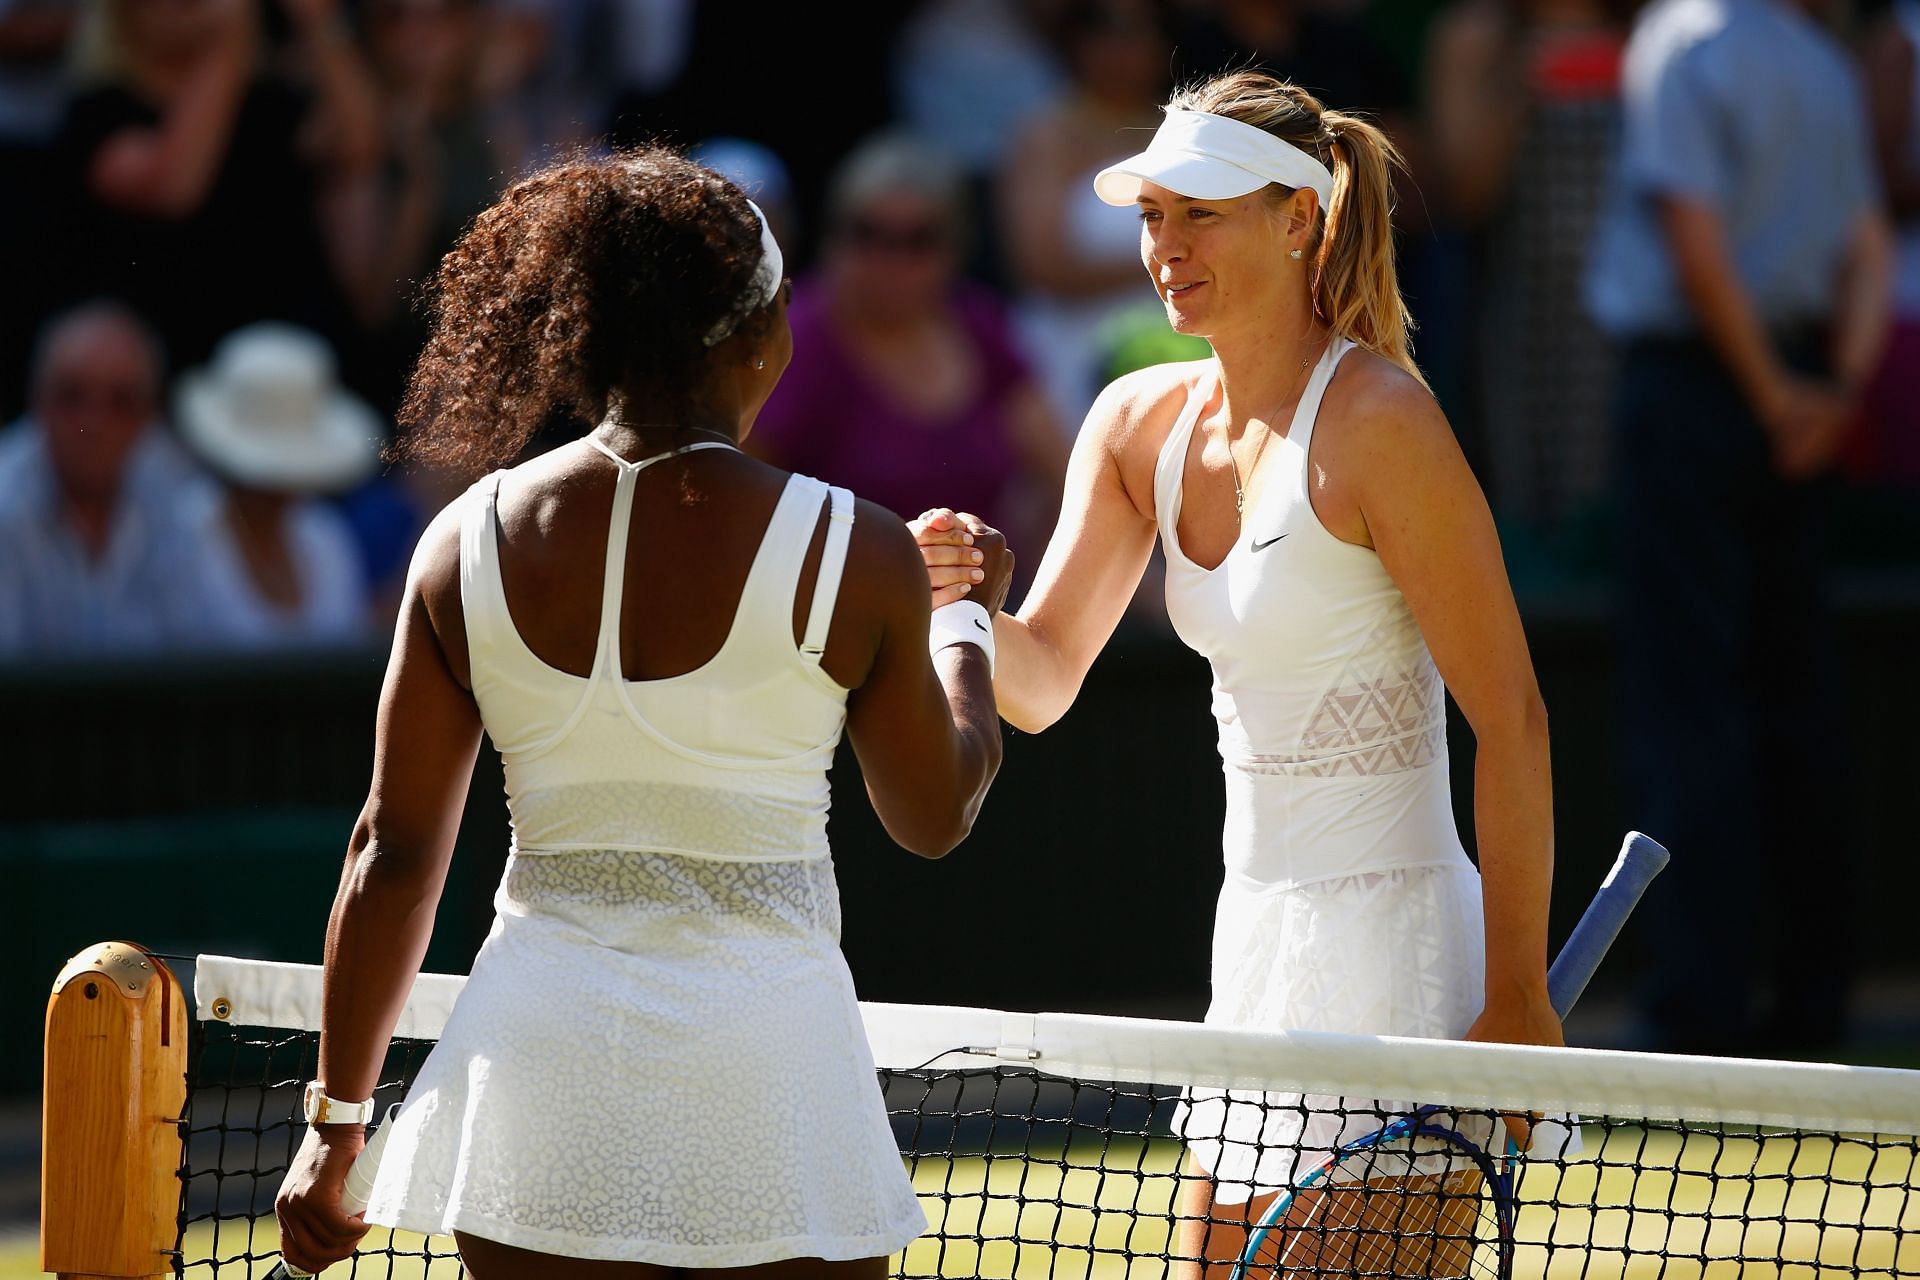 Serena Williams and Sharapova after their Wimbledon clash in 2015